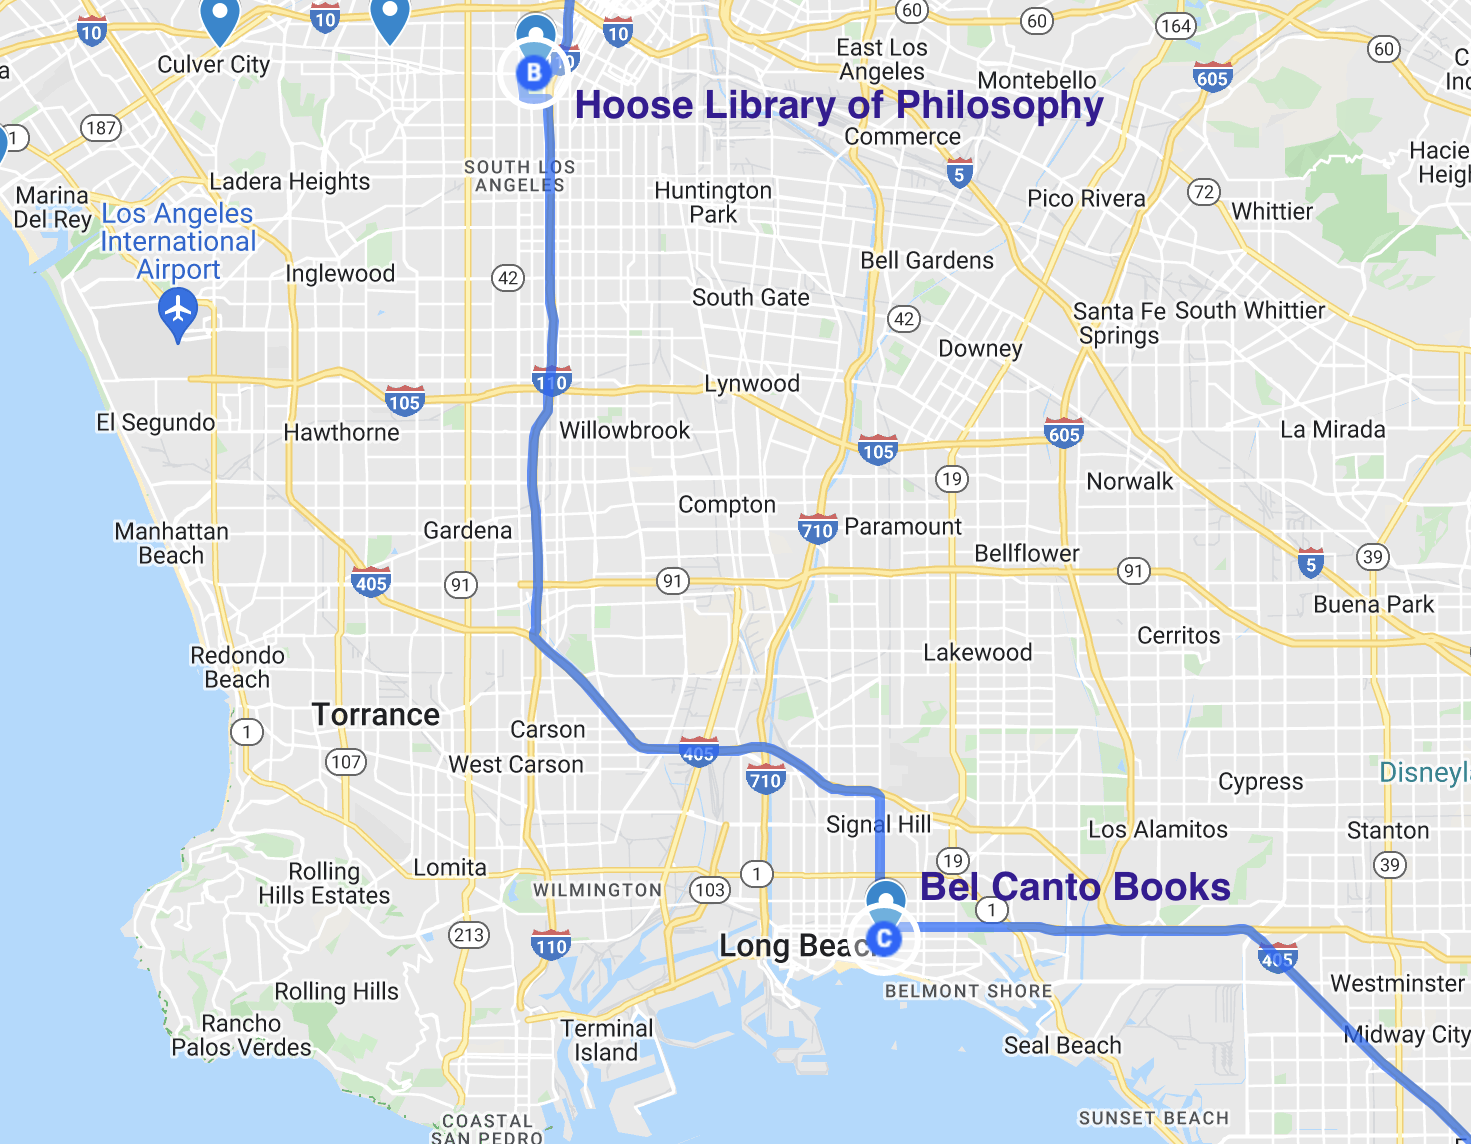 map of literary stops in LA and Long Beach California